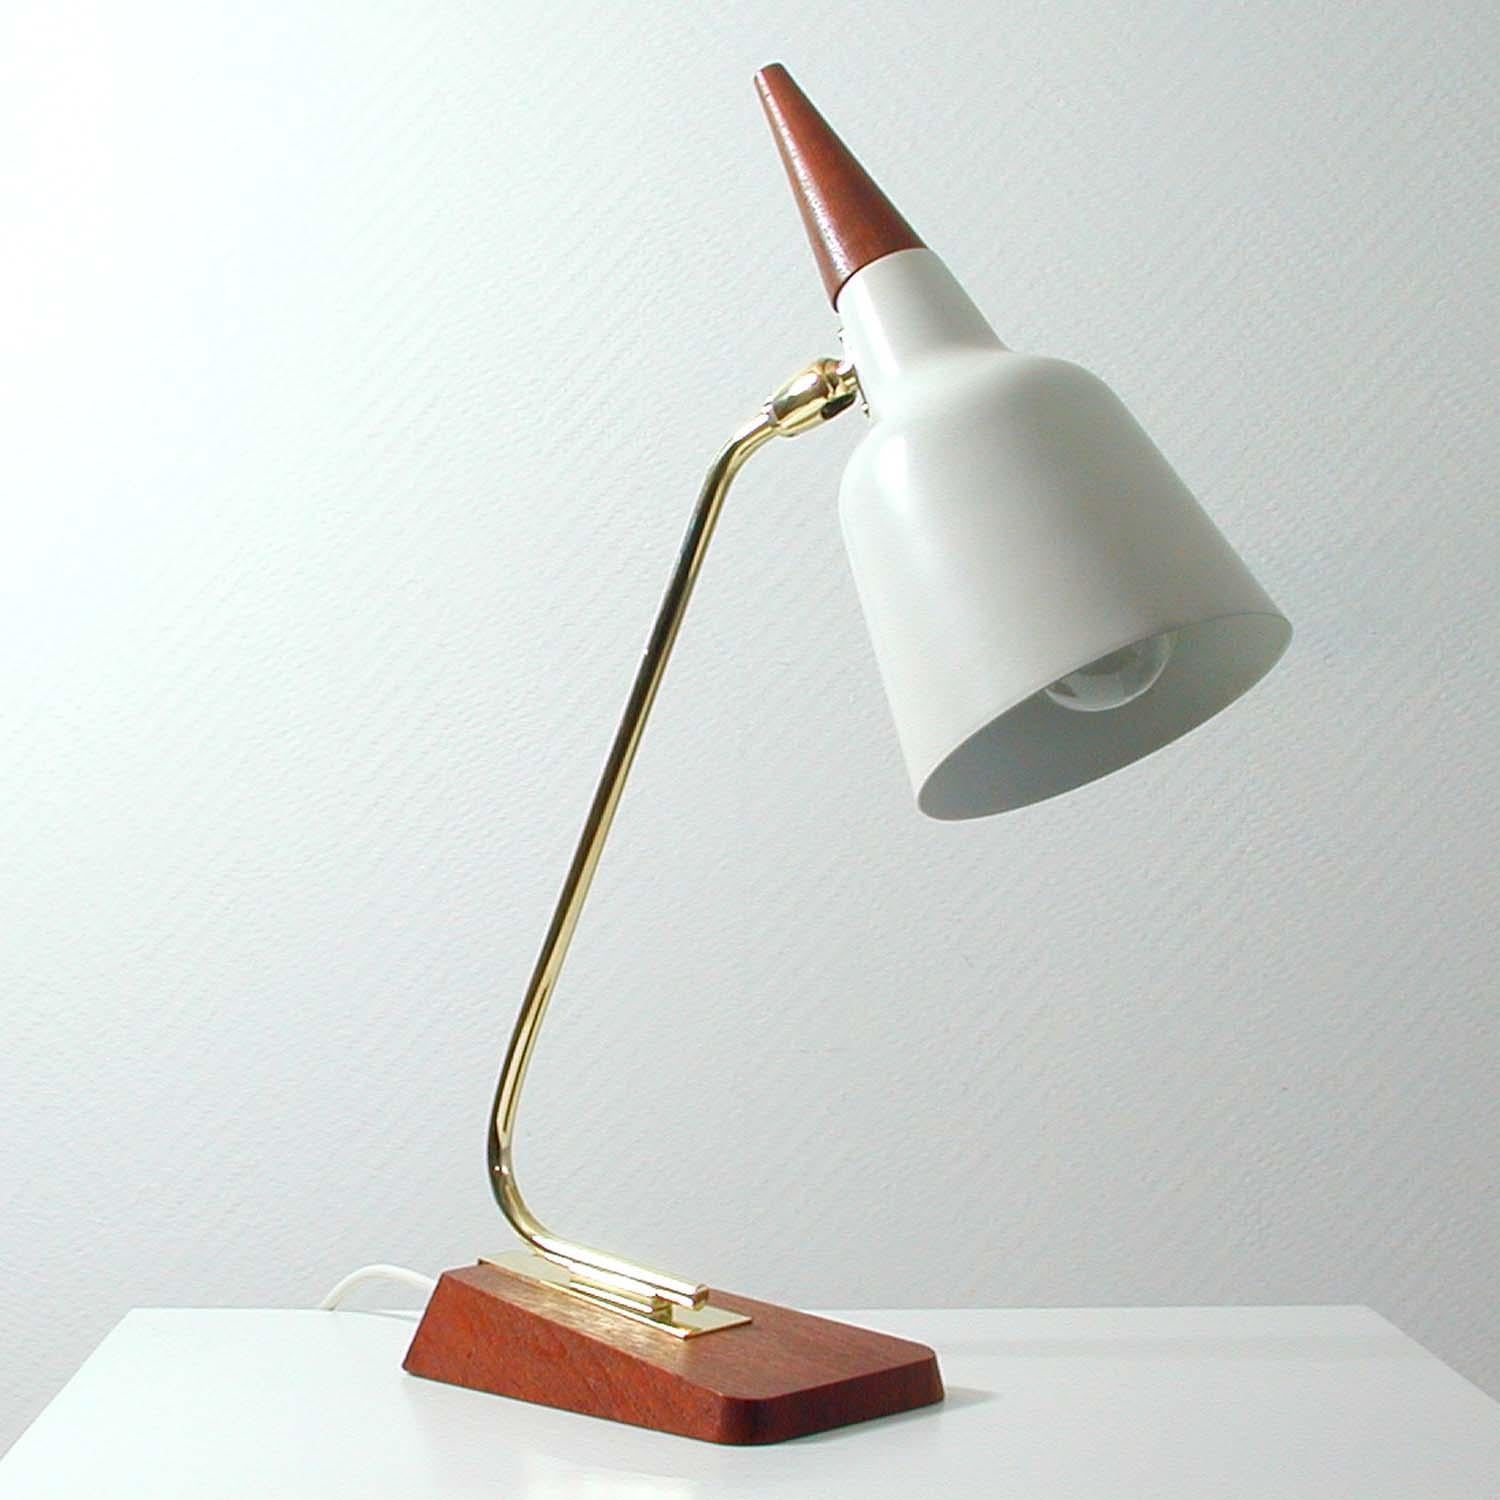 This very rare and elegant table or desk lamp was designed and manufactured in Germany in the 1950s by Kaiser Leuchten. It has got a teak and brass base, a brass lamp arm and a light cream / white lacquered metal adjustable lamp shade with teak